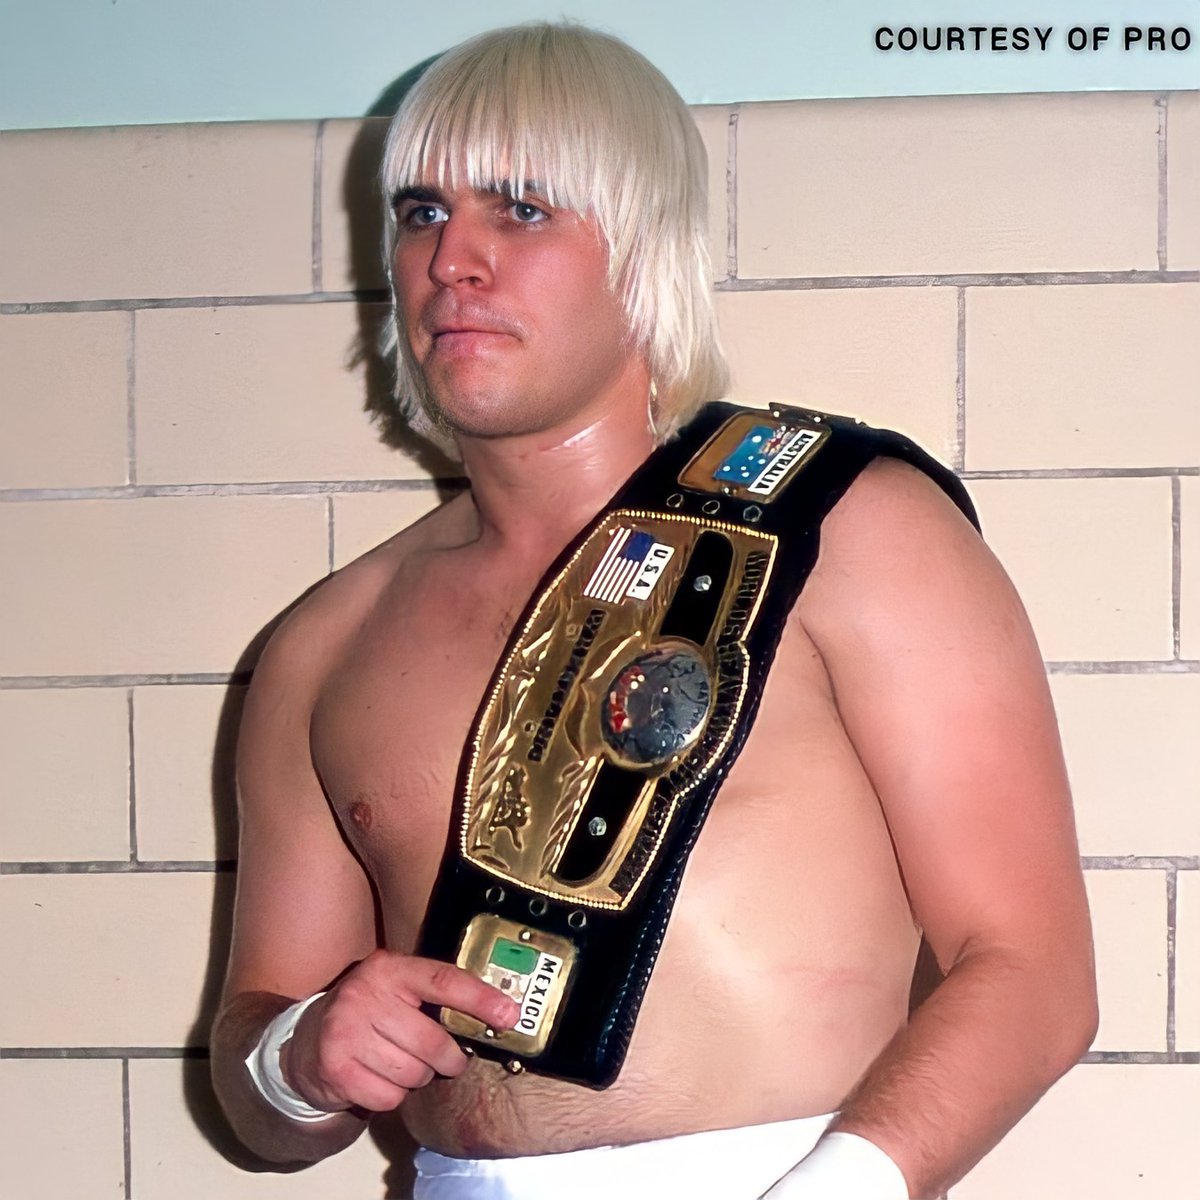 4/27/1981

Tommy Rich defeated Harley Race to win the NWA Championship at a house show in Augusta, Georgia.

#NWA #NationalWrestlingAlliance #TommyRich #Wildfire #HarleyRace #WorldHeavyweightChampionship #WorldHeavyweightChampion #TenPoundsOfGold #WWE #WWELegend #WWEHistory